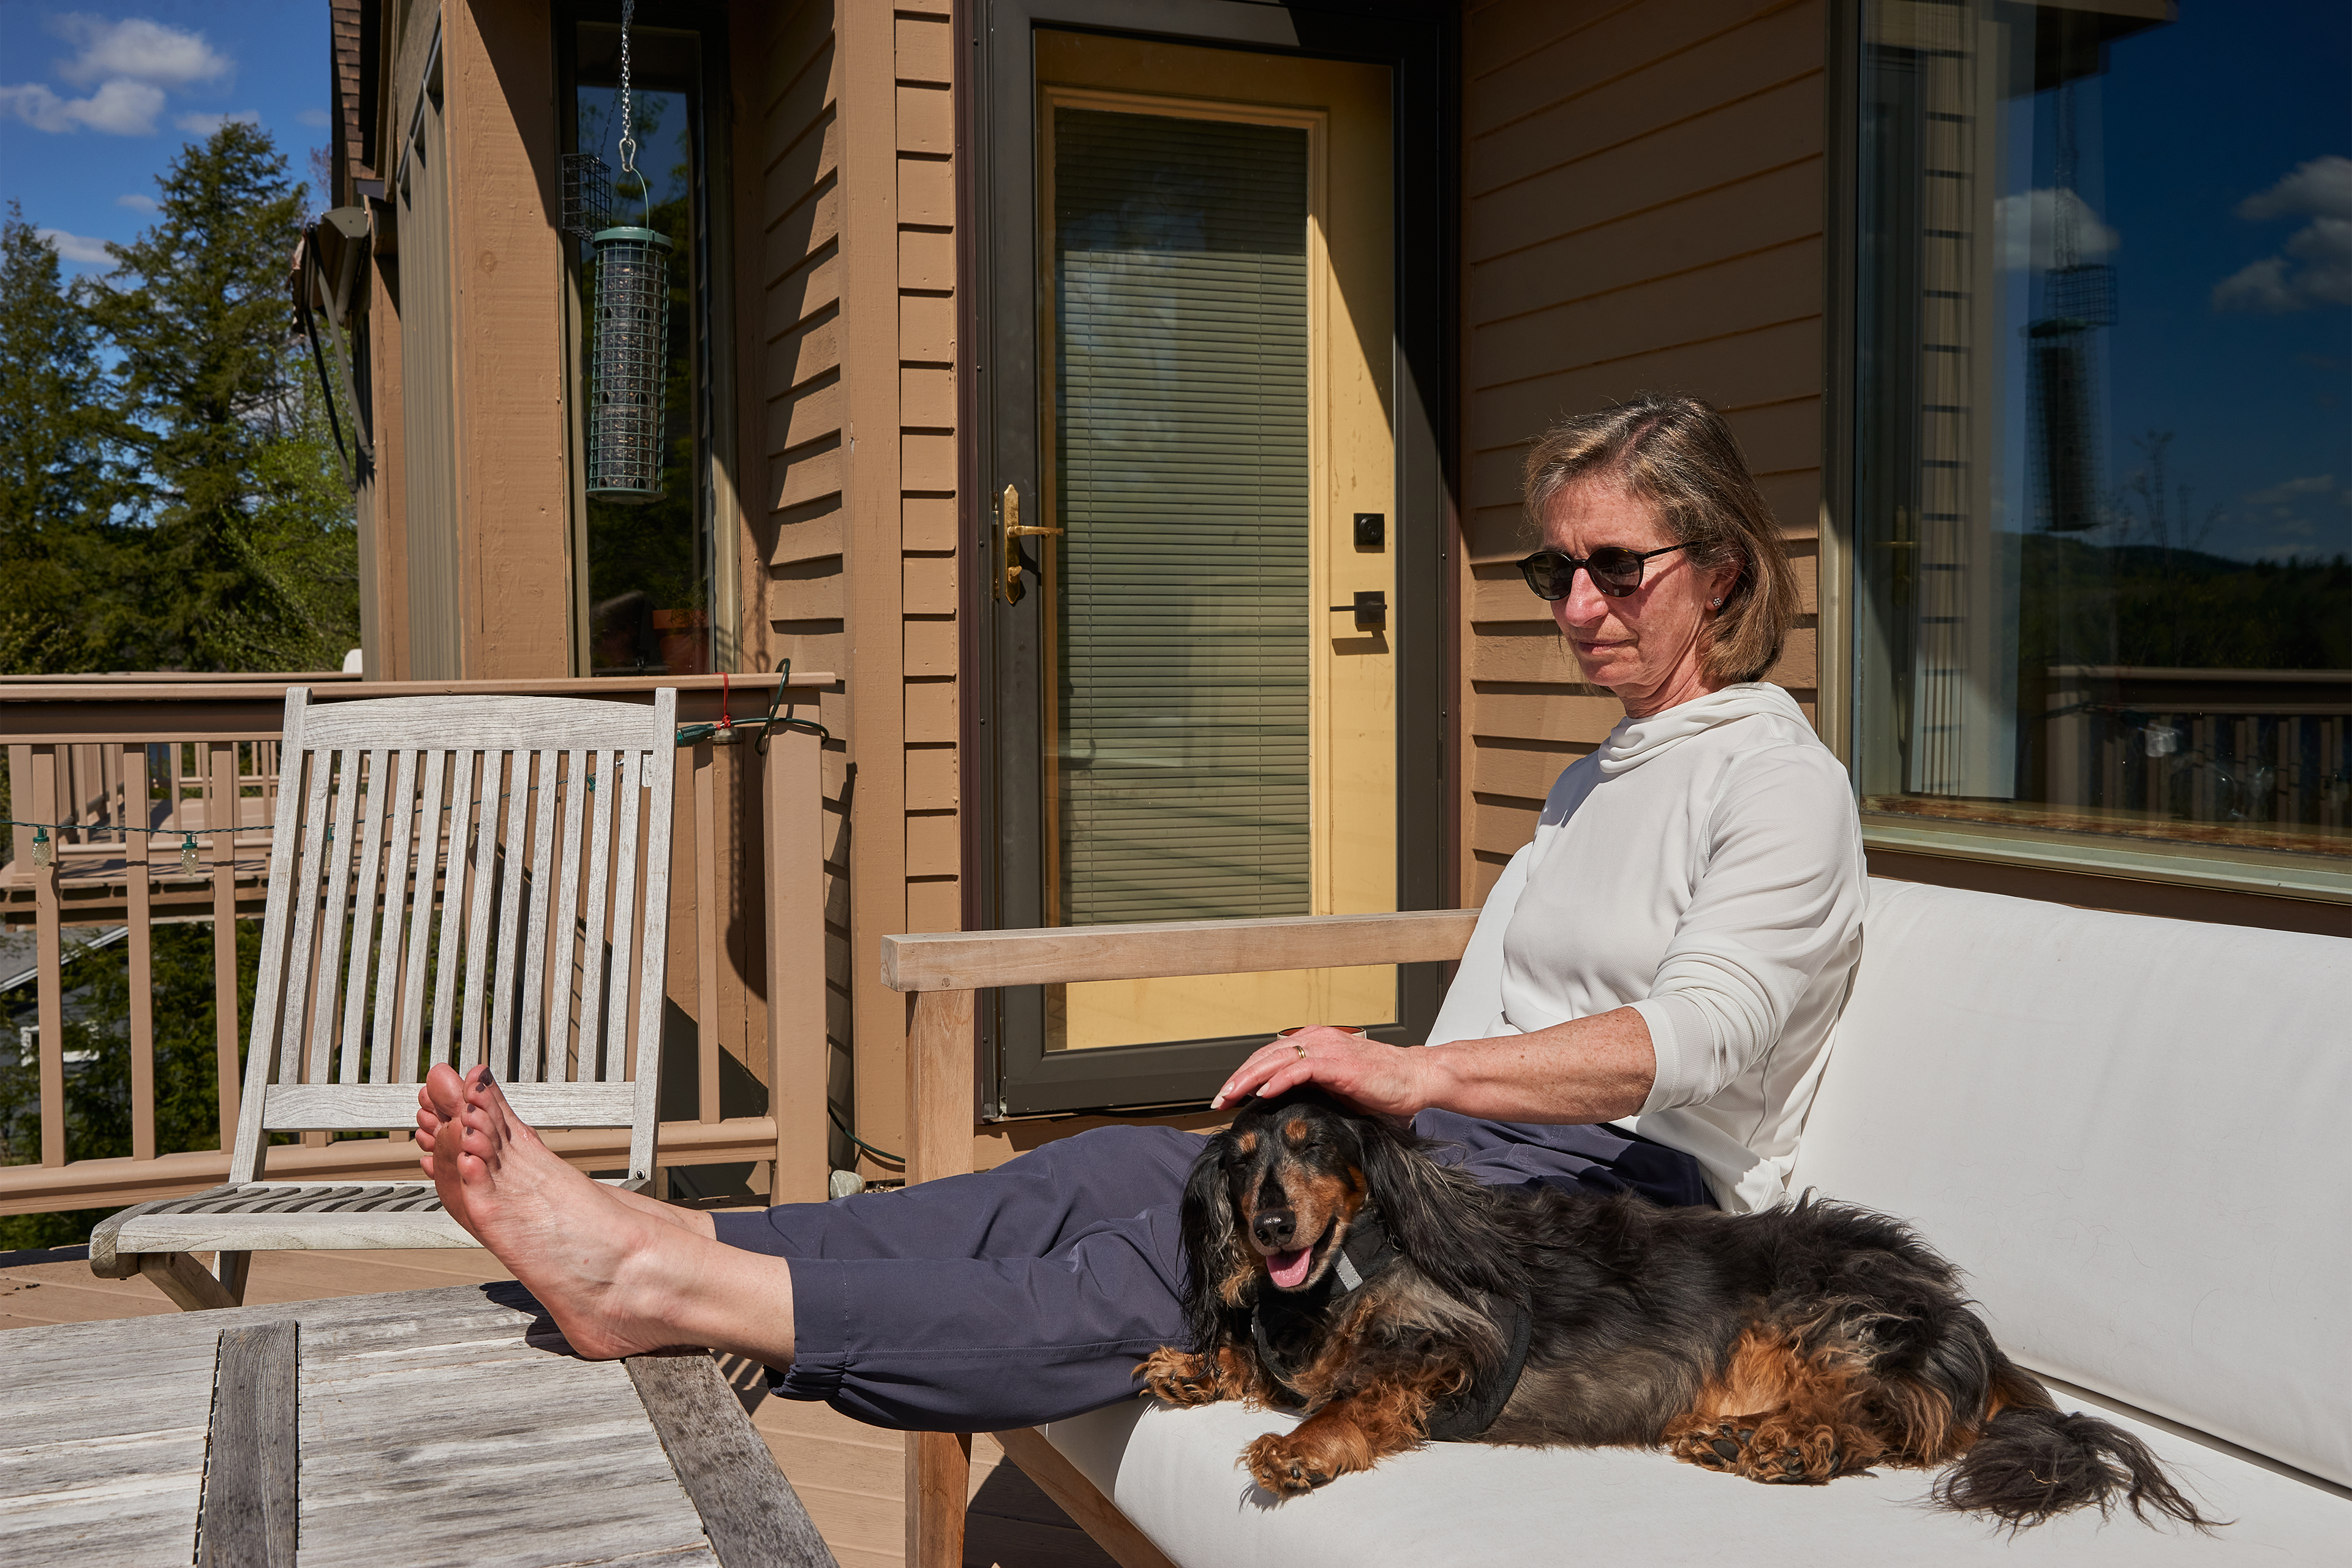 Elizabeth Melville sits outdoors wearing sunglasses. She is petting a dog lying next to her.